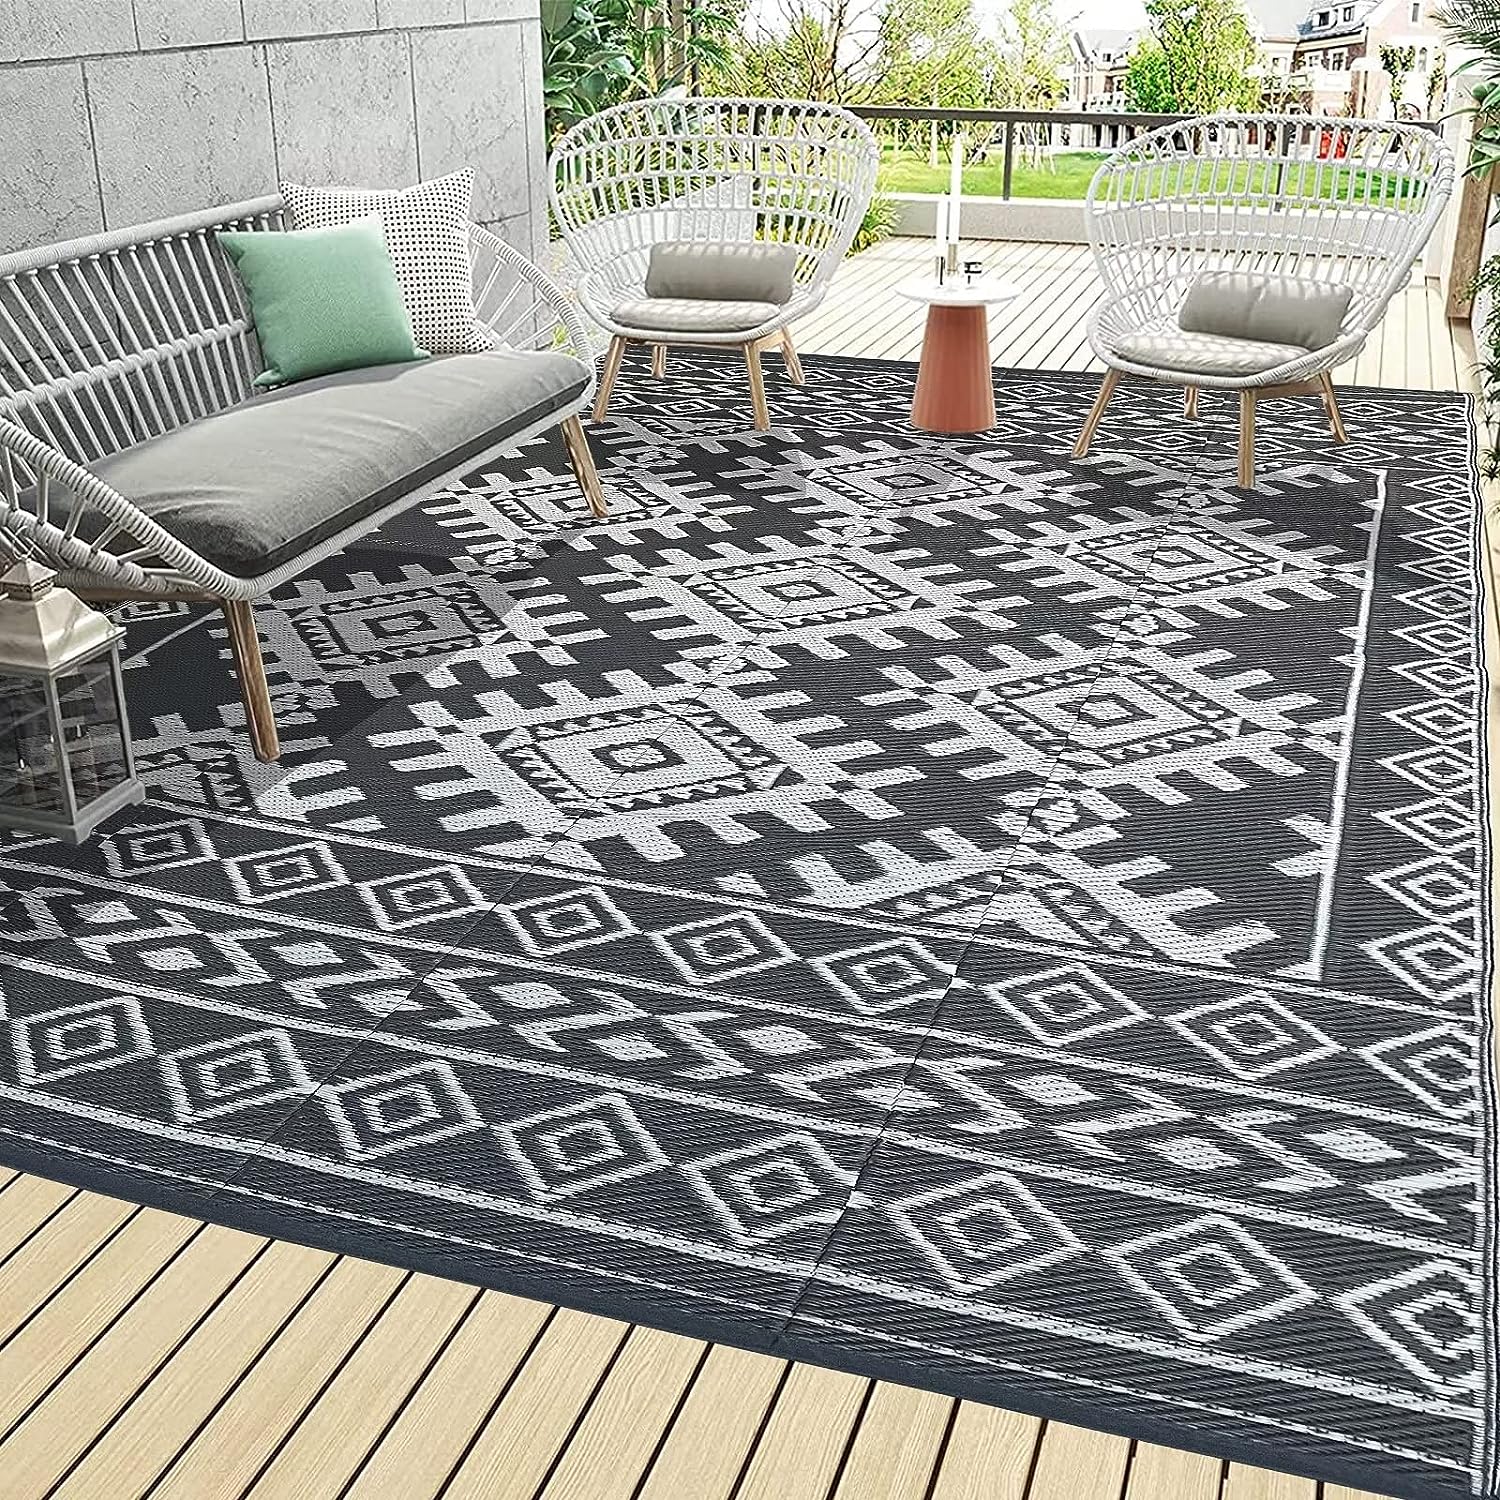 Outdoor Rugs for Patio Clearance - 5'x8' Waterproof [...]